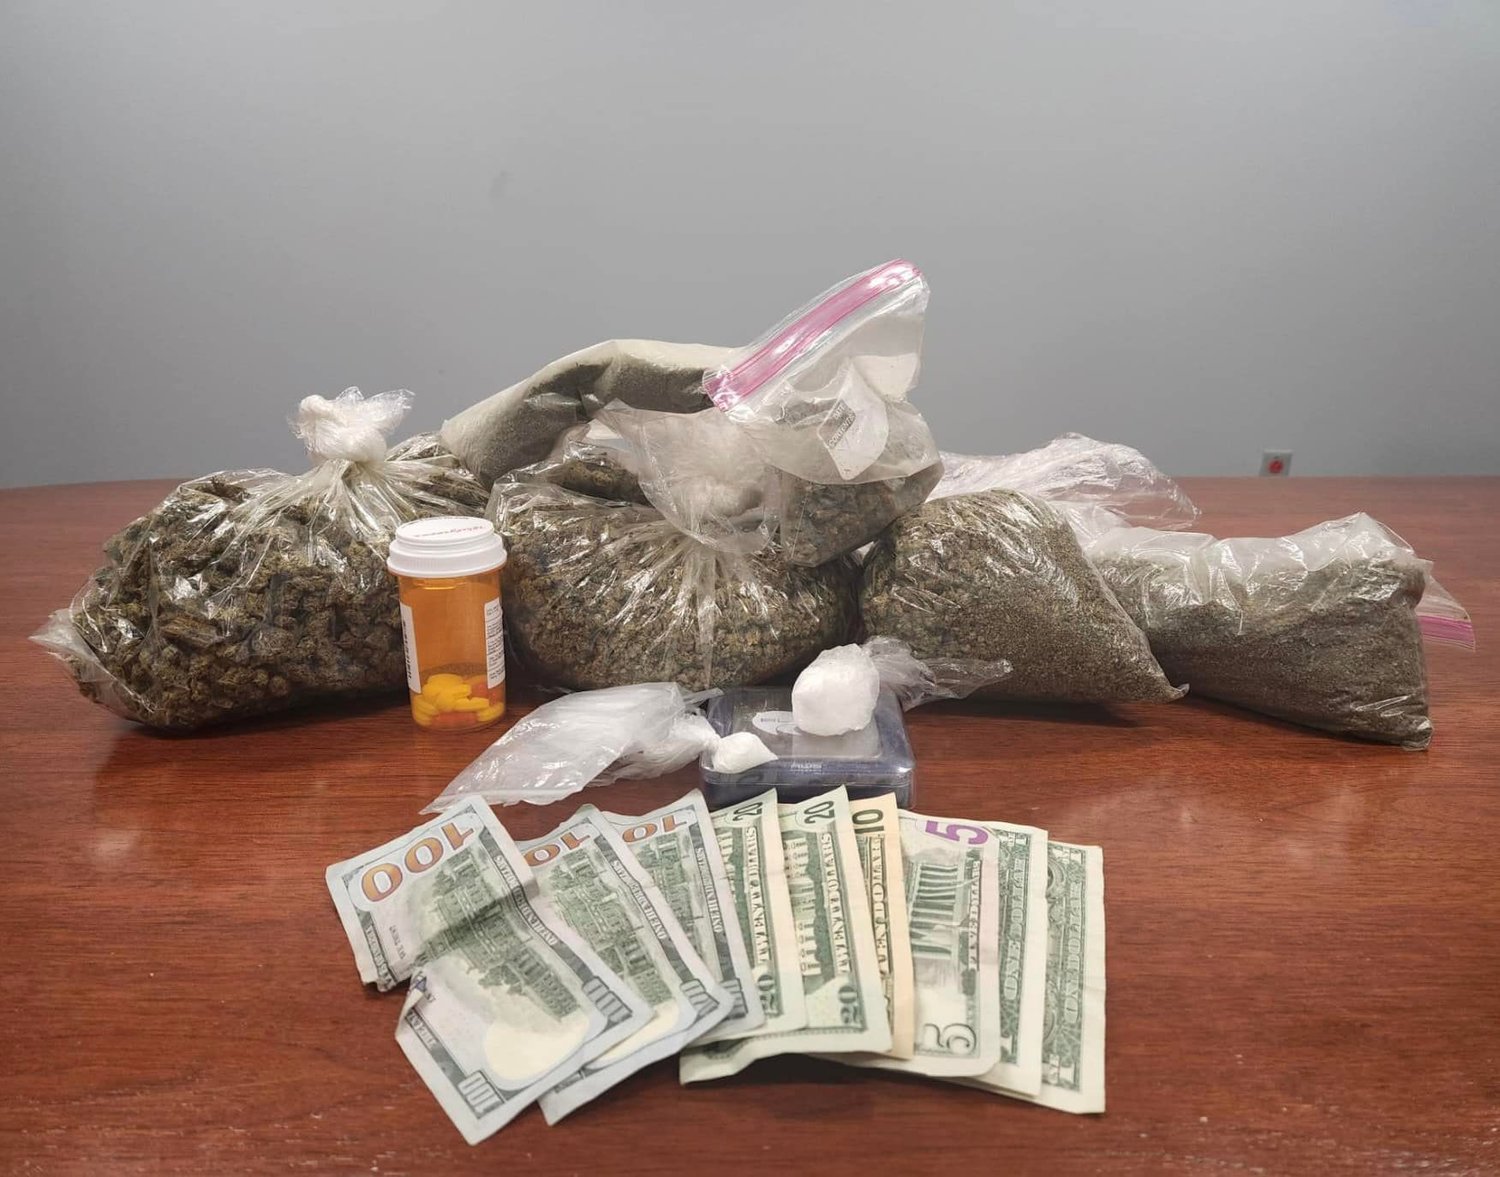 SEIZED DRUGS — Sheriff’s deputies seized multiple forms of illegal drugs and over $300 in an arrest last week.